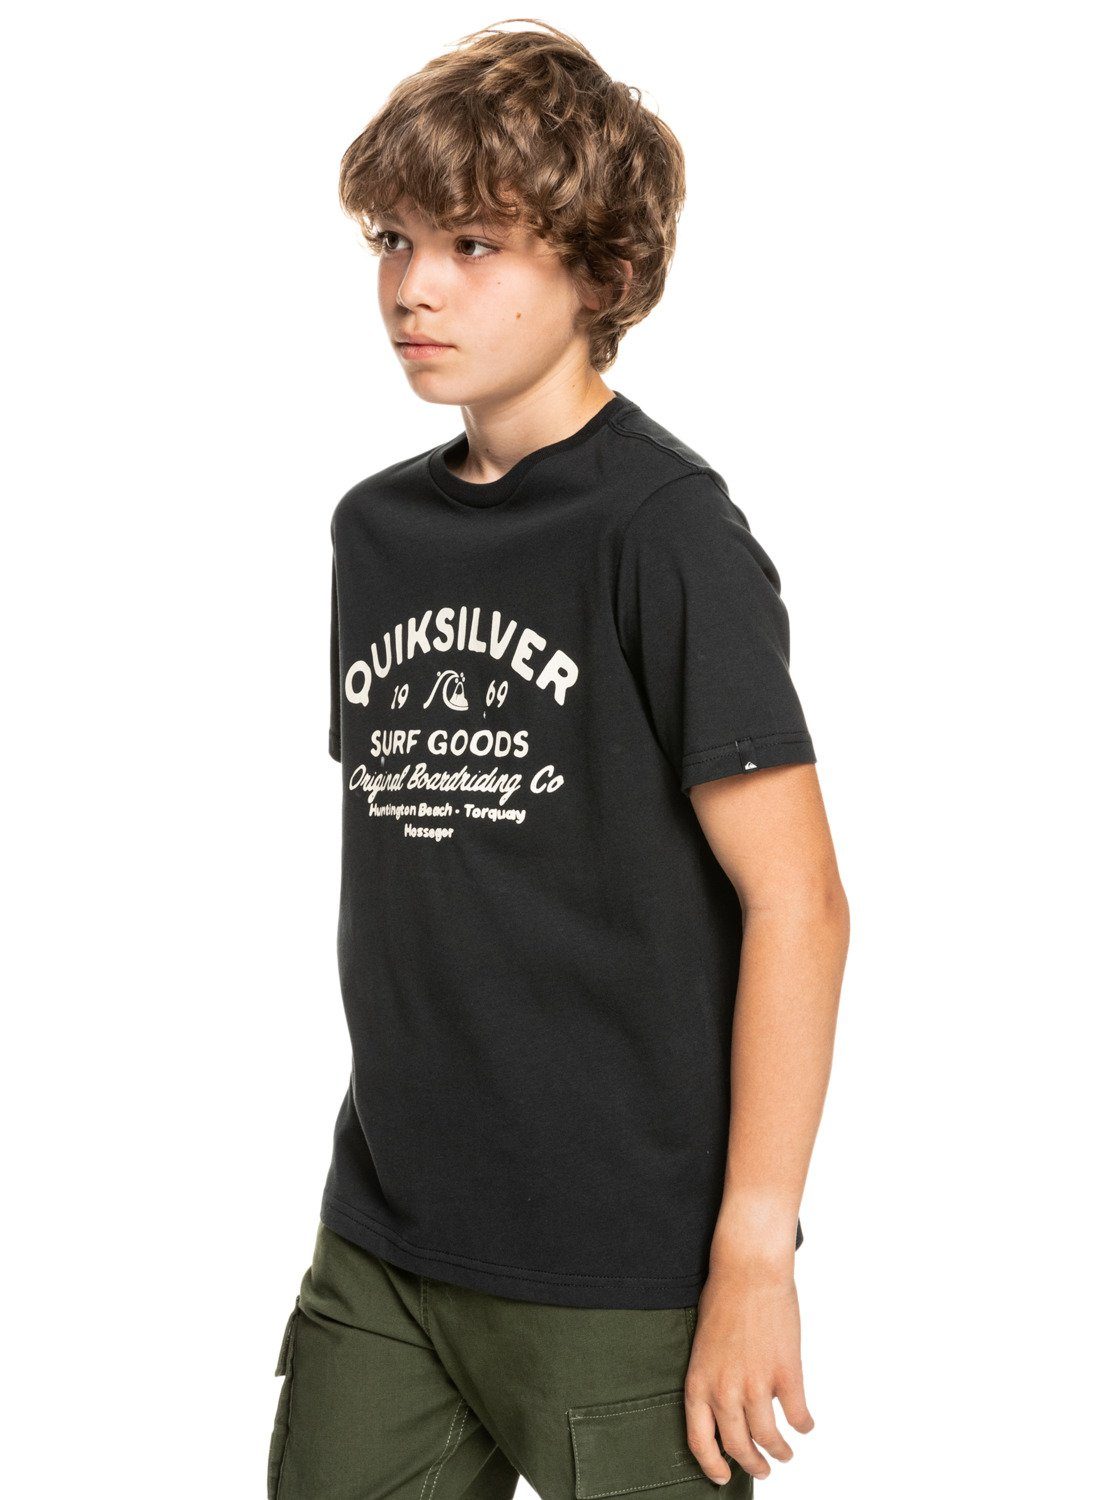 Kinder Teens (Gr. 128 - 182) Quiksilver T-Shirt Closed Tions